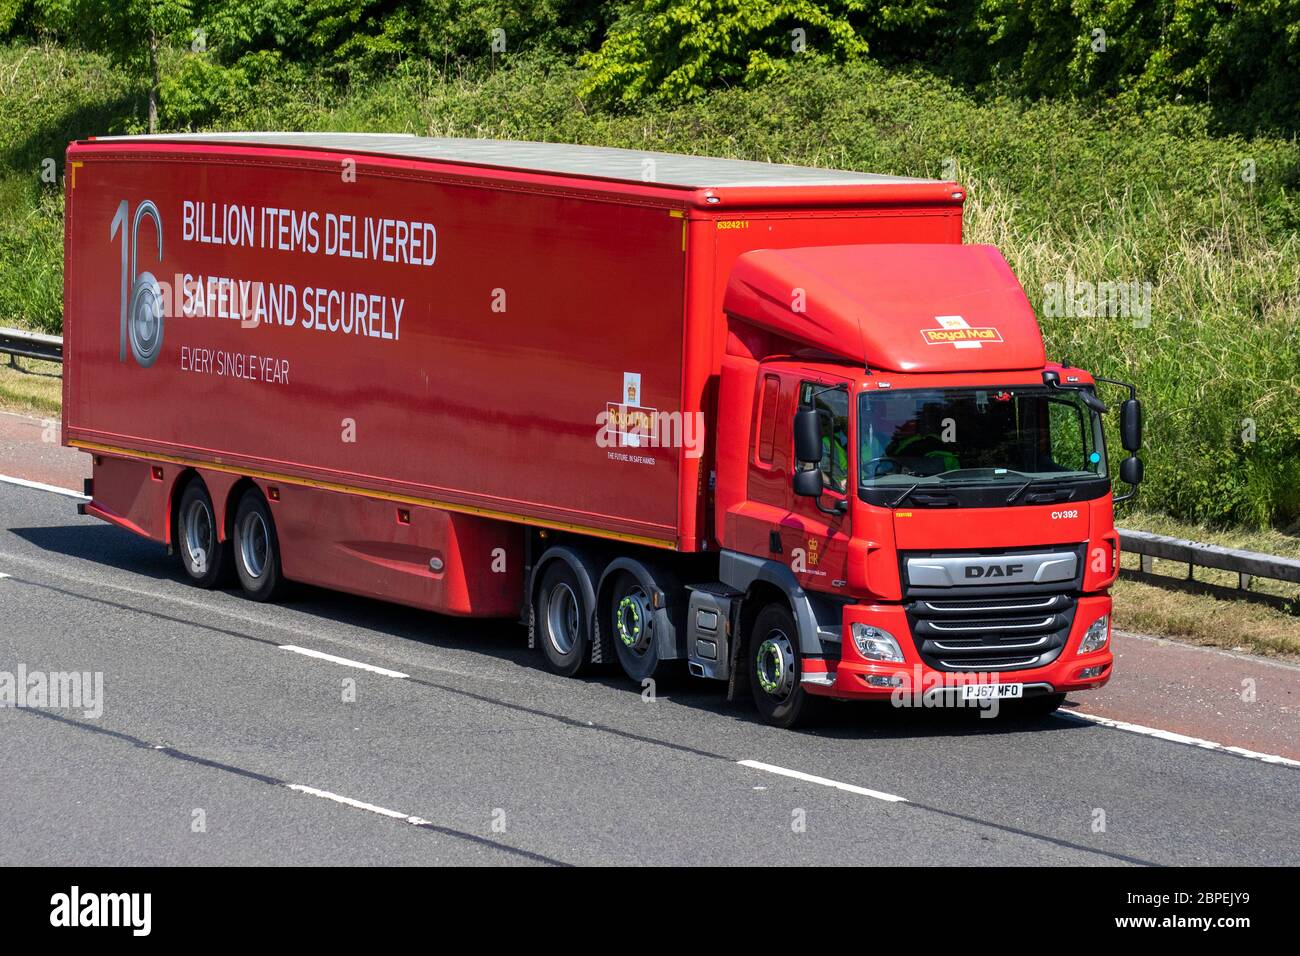 Royal Mail Haulage delivery trucks, lorry, transportation, truck, cargo carrier, DAF vehicle, European commercial transport, industry, M6 at Manchester, UK Stock Photo